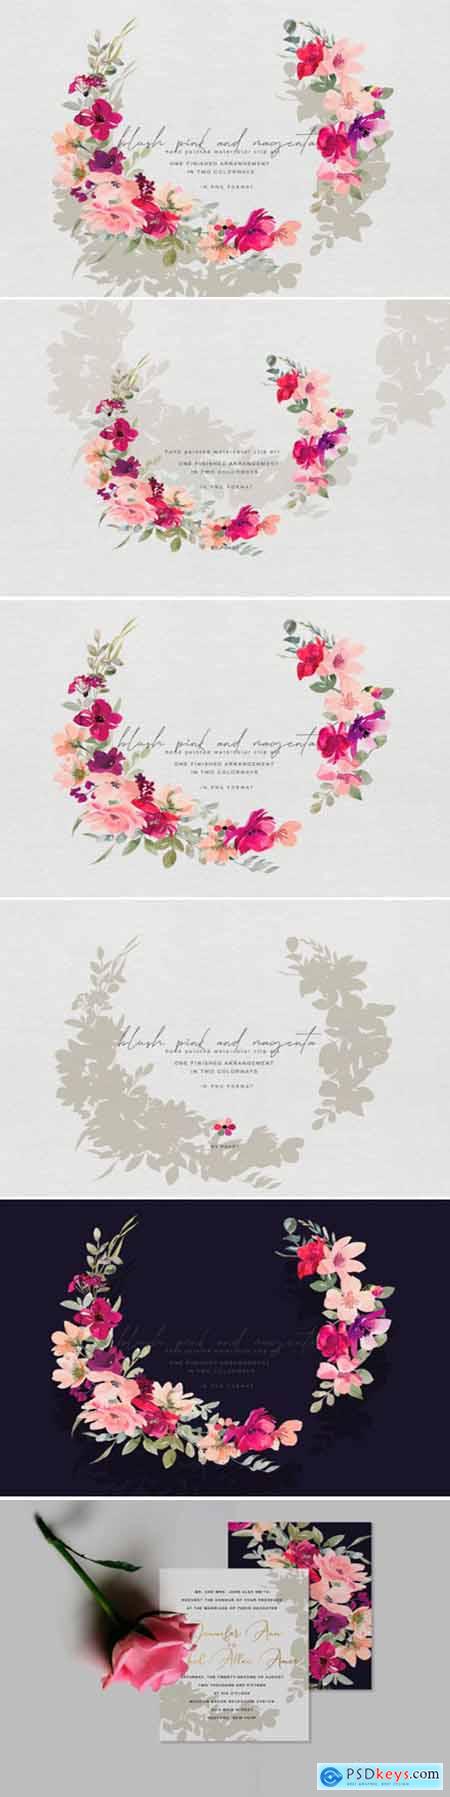 Hand Painted Watercolor Floral Wreath 1743293